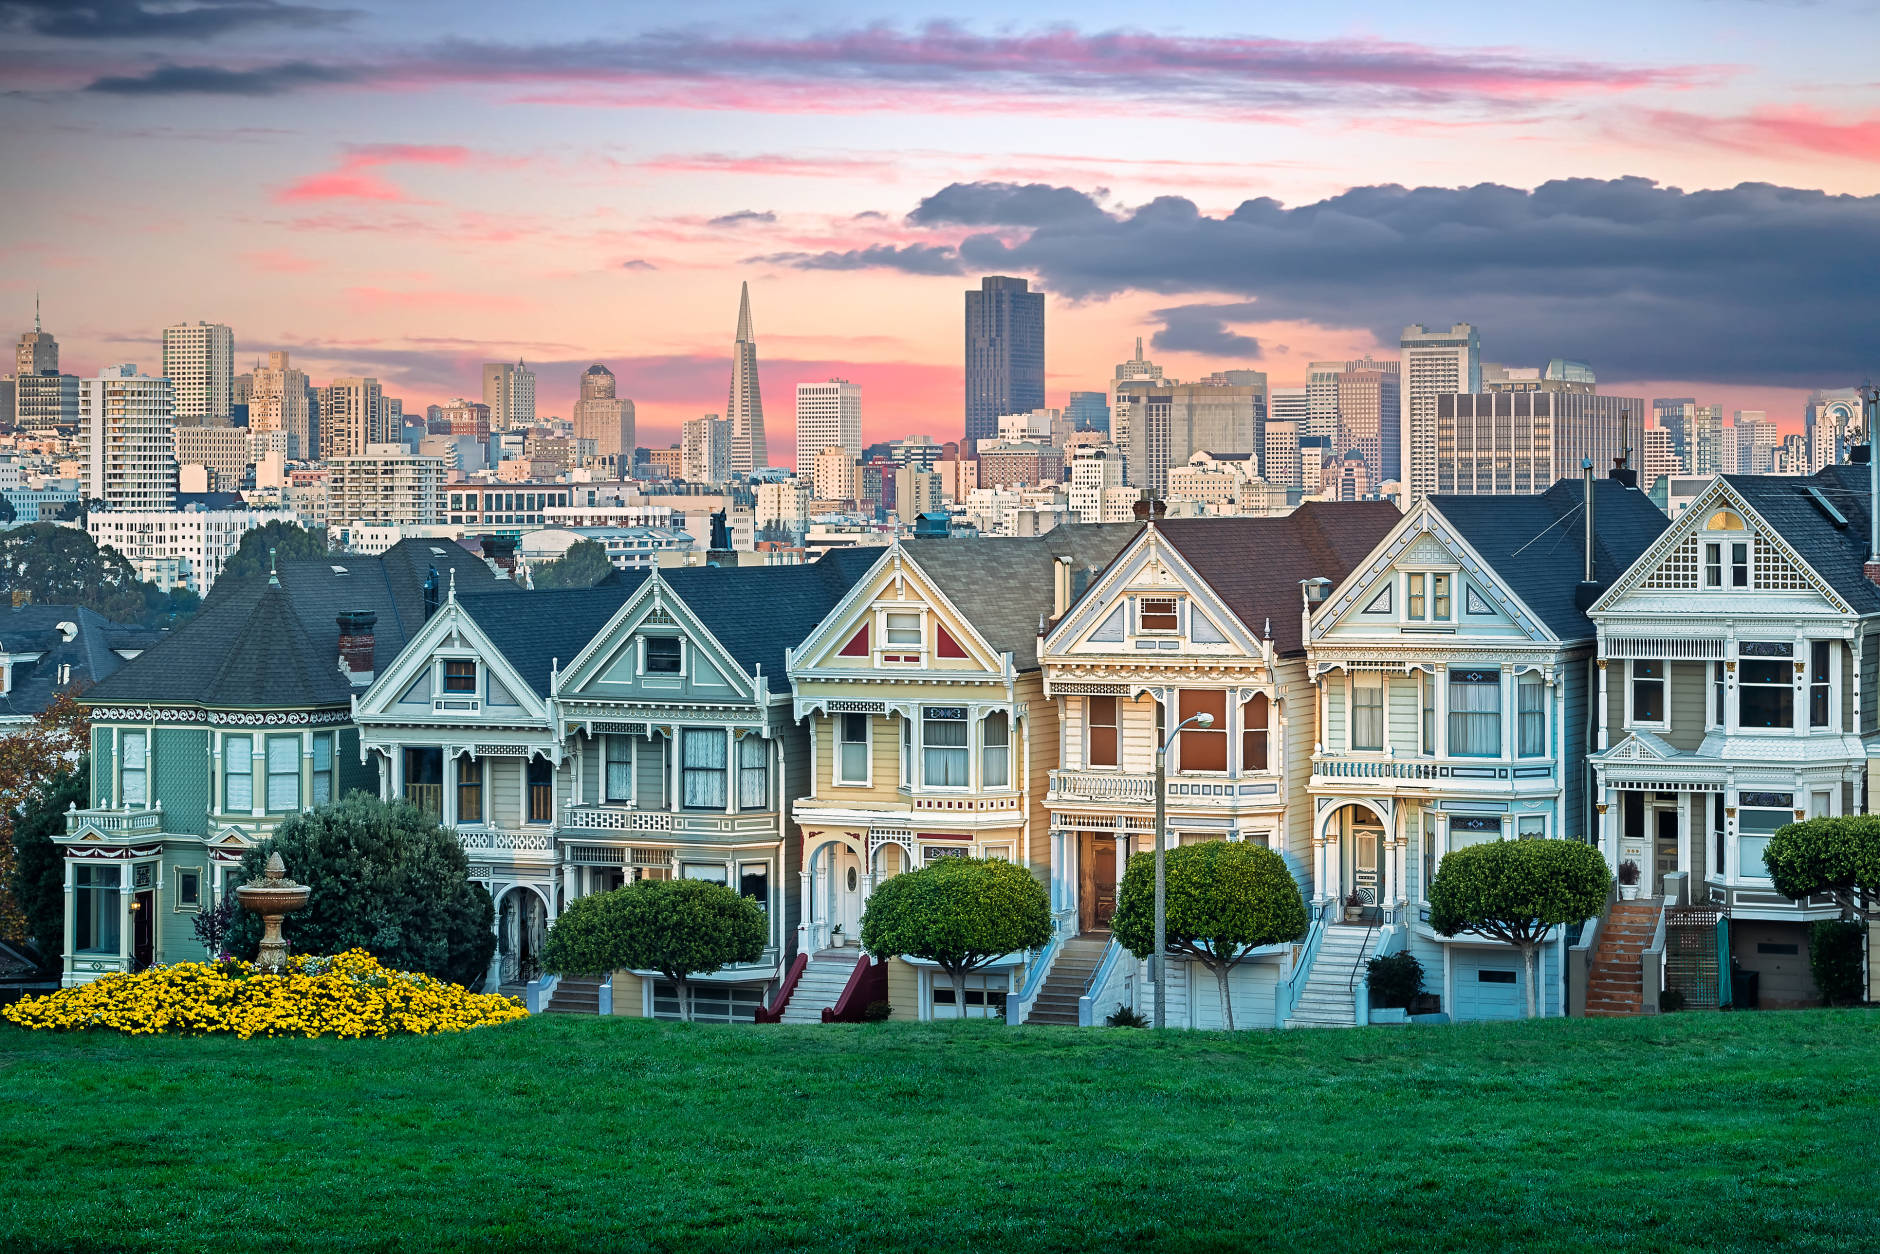 3. San Francisco, California

San Francisco lands at No. 3 in Conde Nast Traveler's "The Best Big U.S. Cities." (Getty Images/iStockphoto/Guner_Gulyesil)